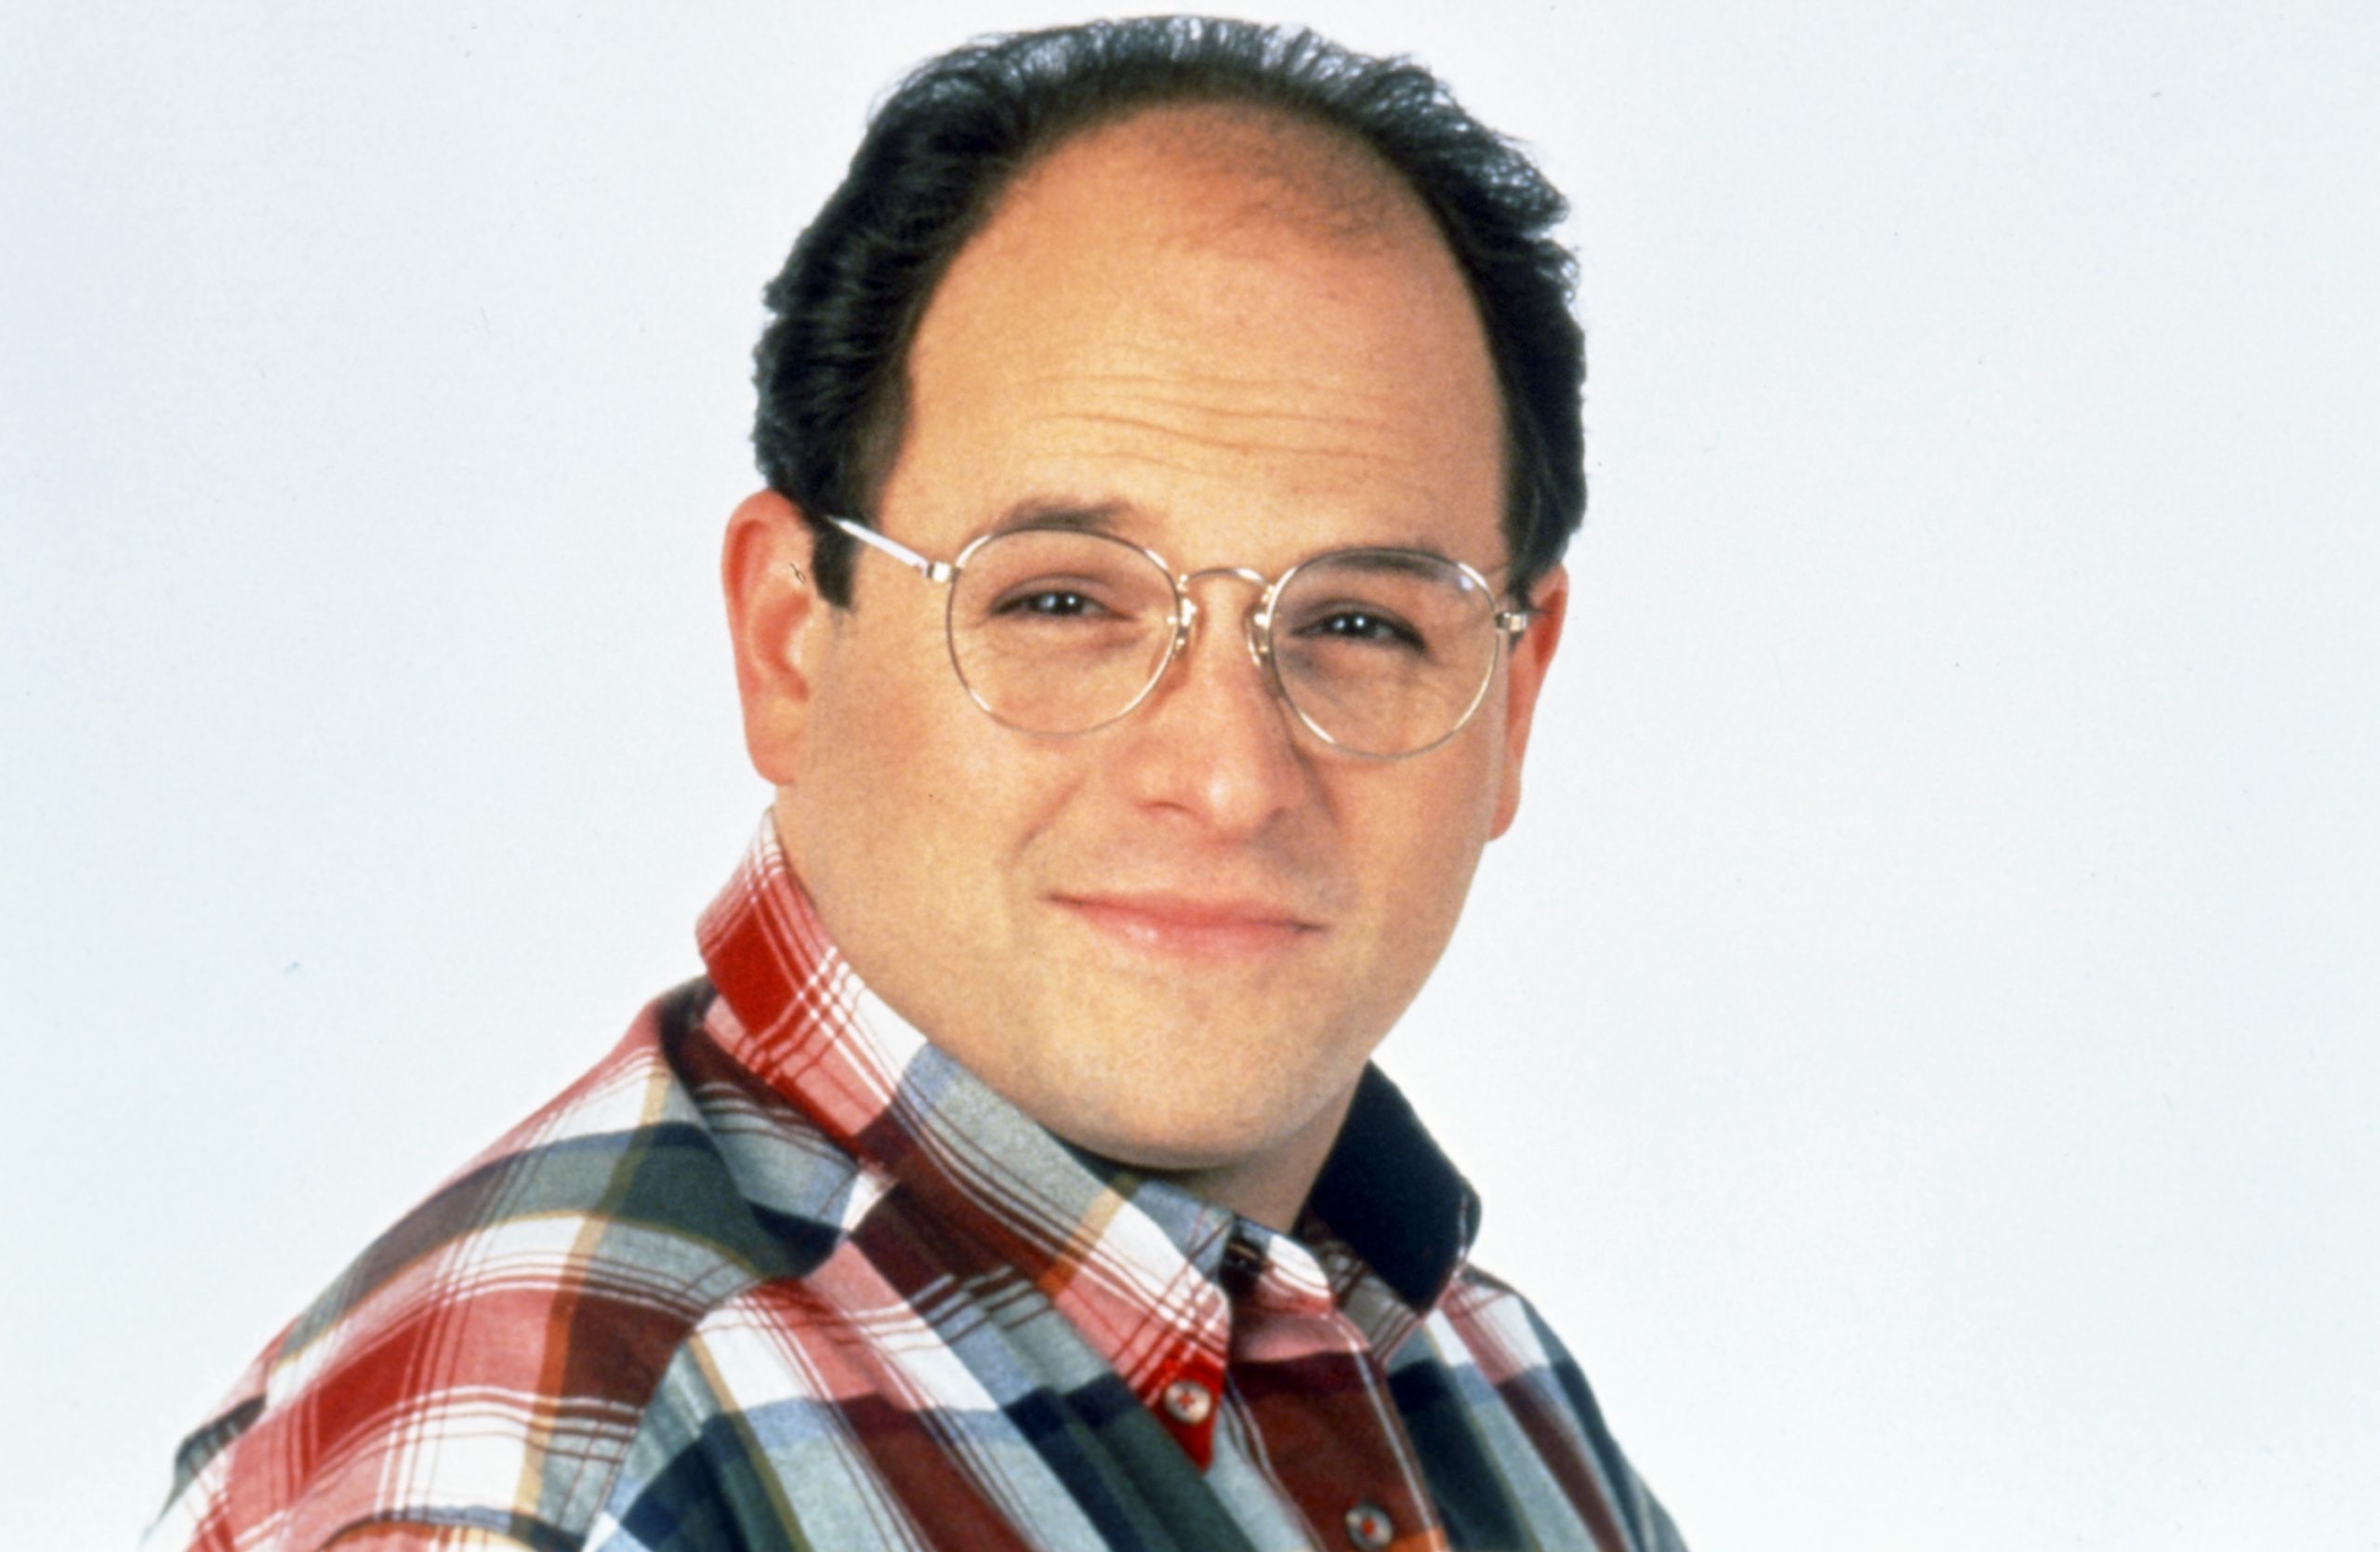 'Seinfeld': The Real George Costanza Sued NBC for $100 Million for ...